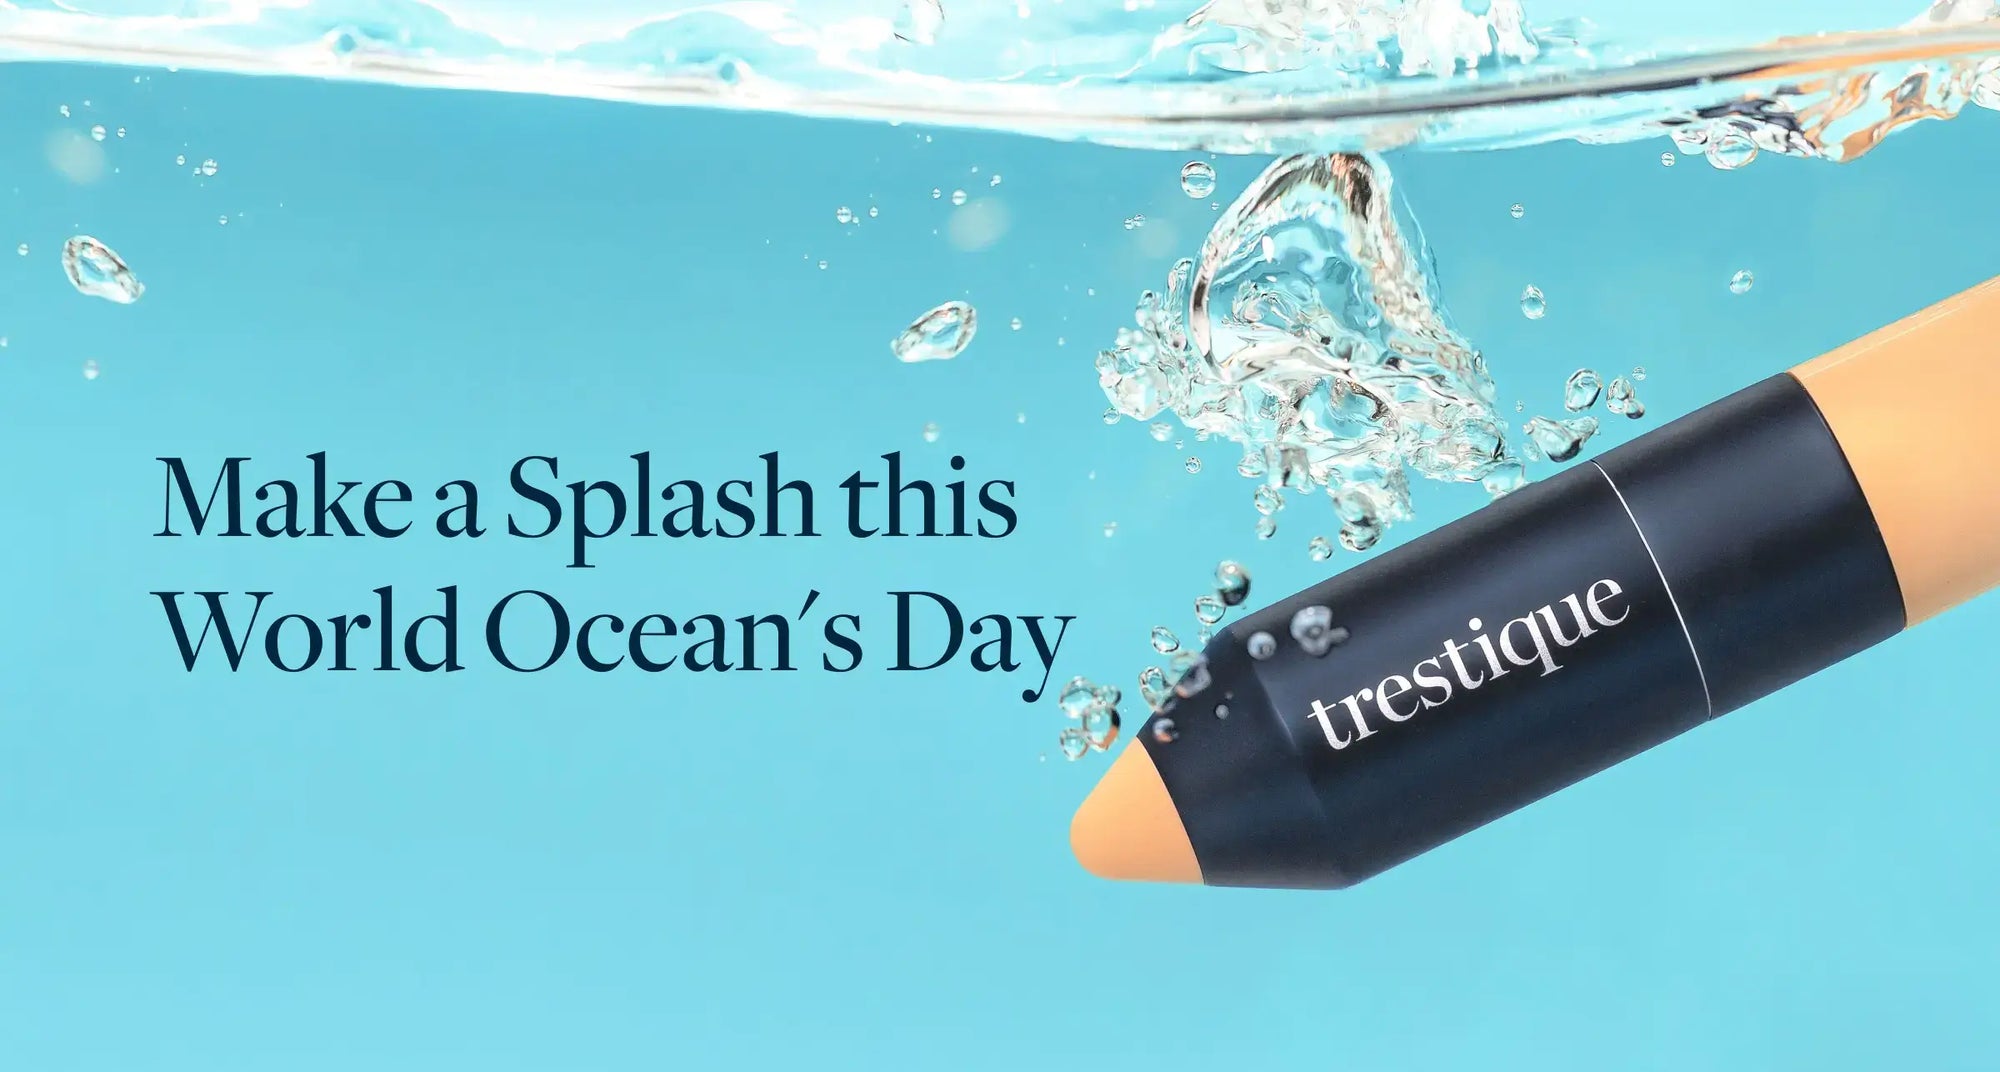 Make a Splash with Eco-Friendly Makeup this World Ocean's Day